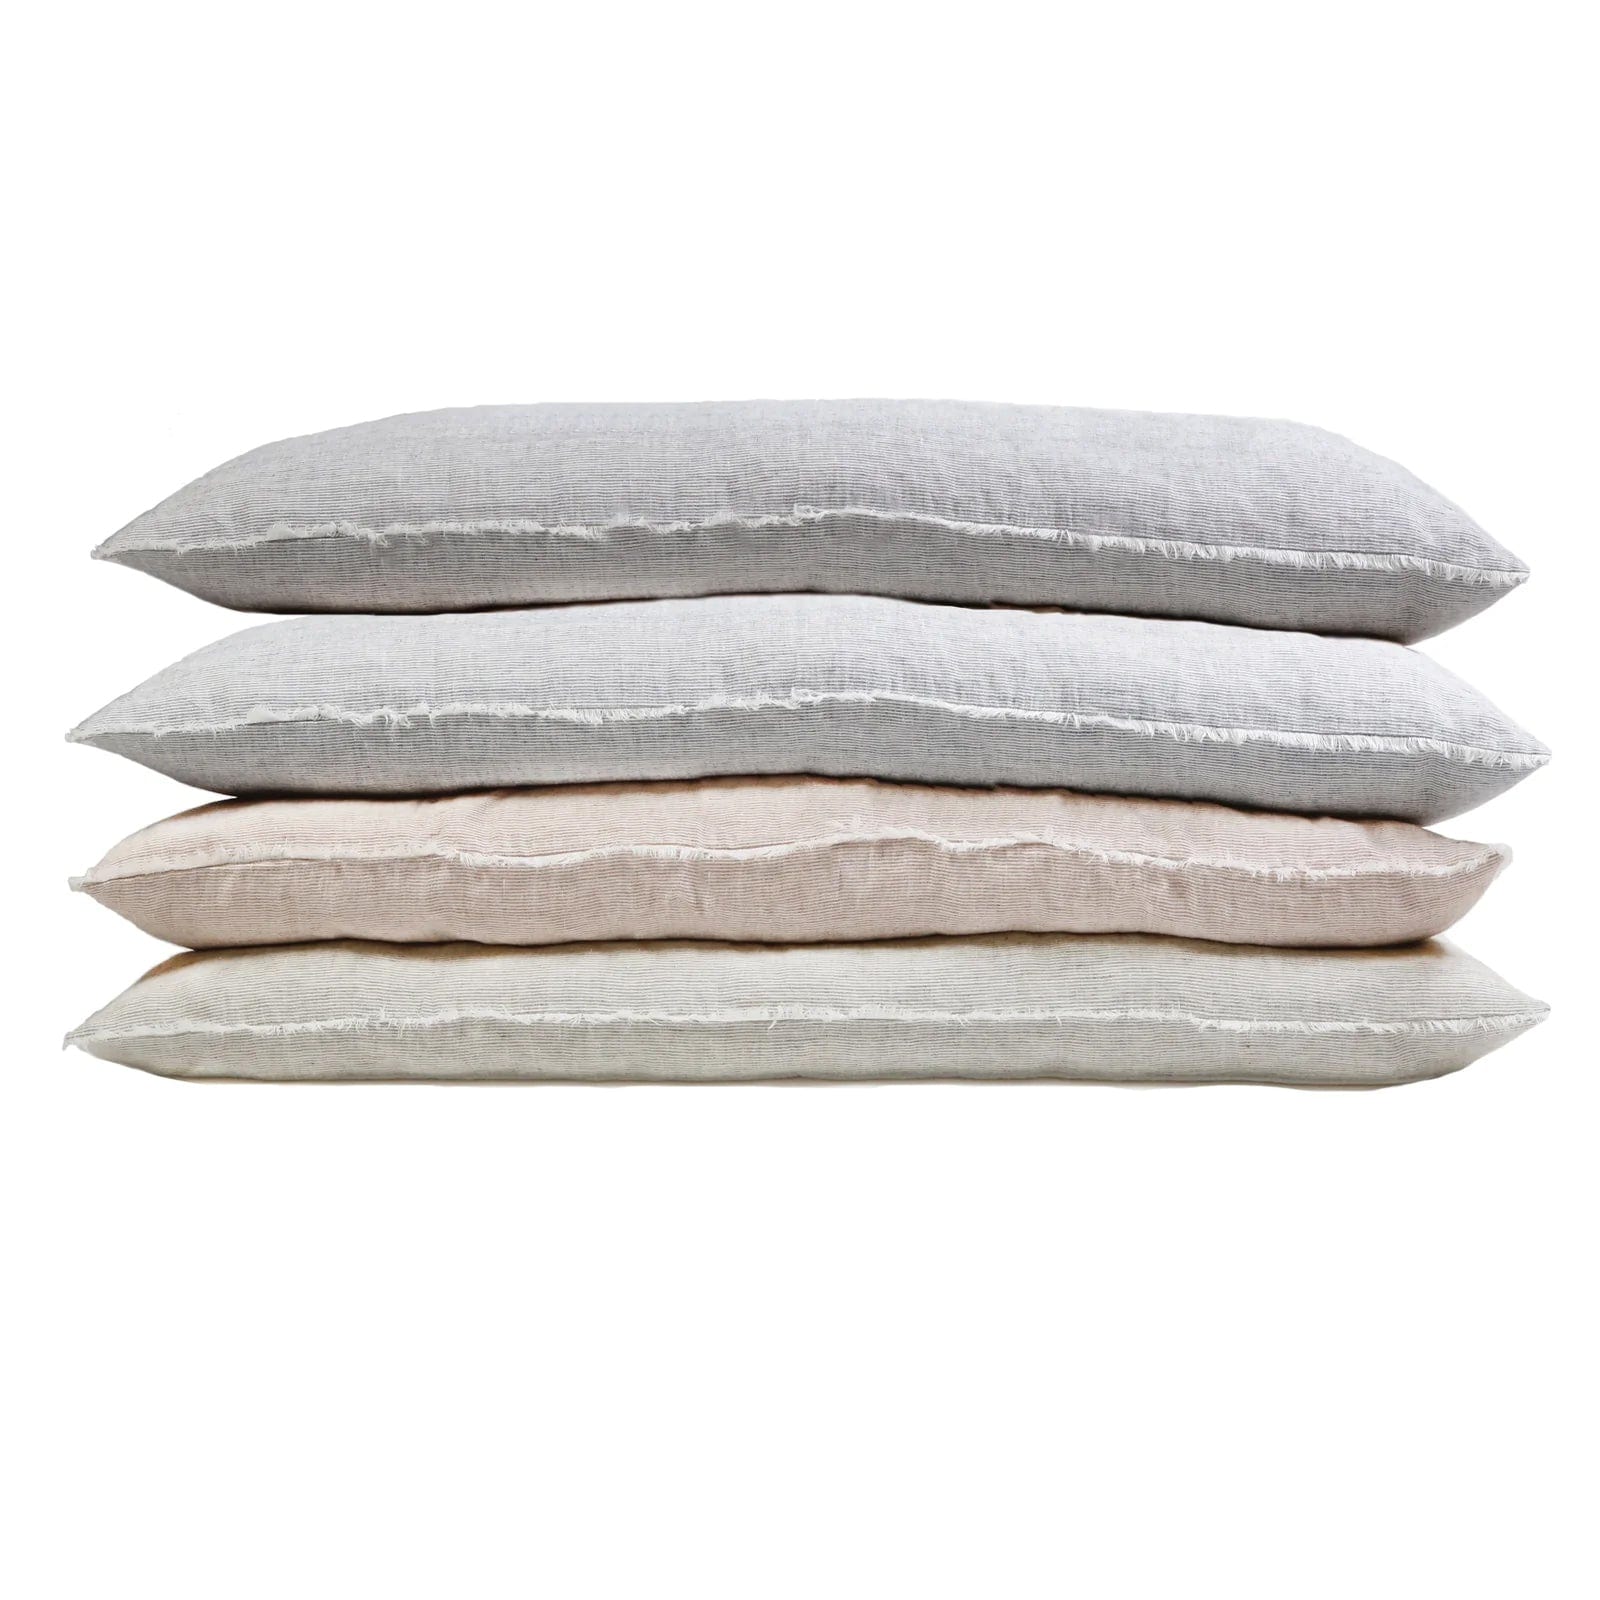 Morrison Filled Big Pillow By Pom Pom At Home – Bella Vita Gifts